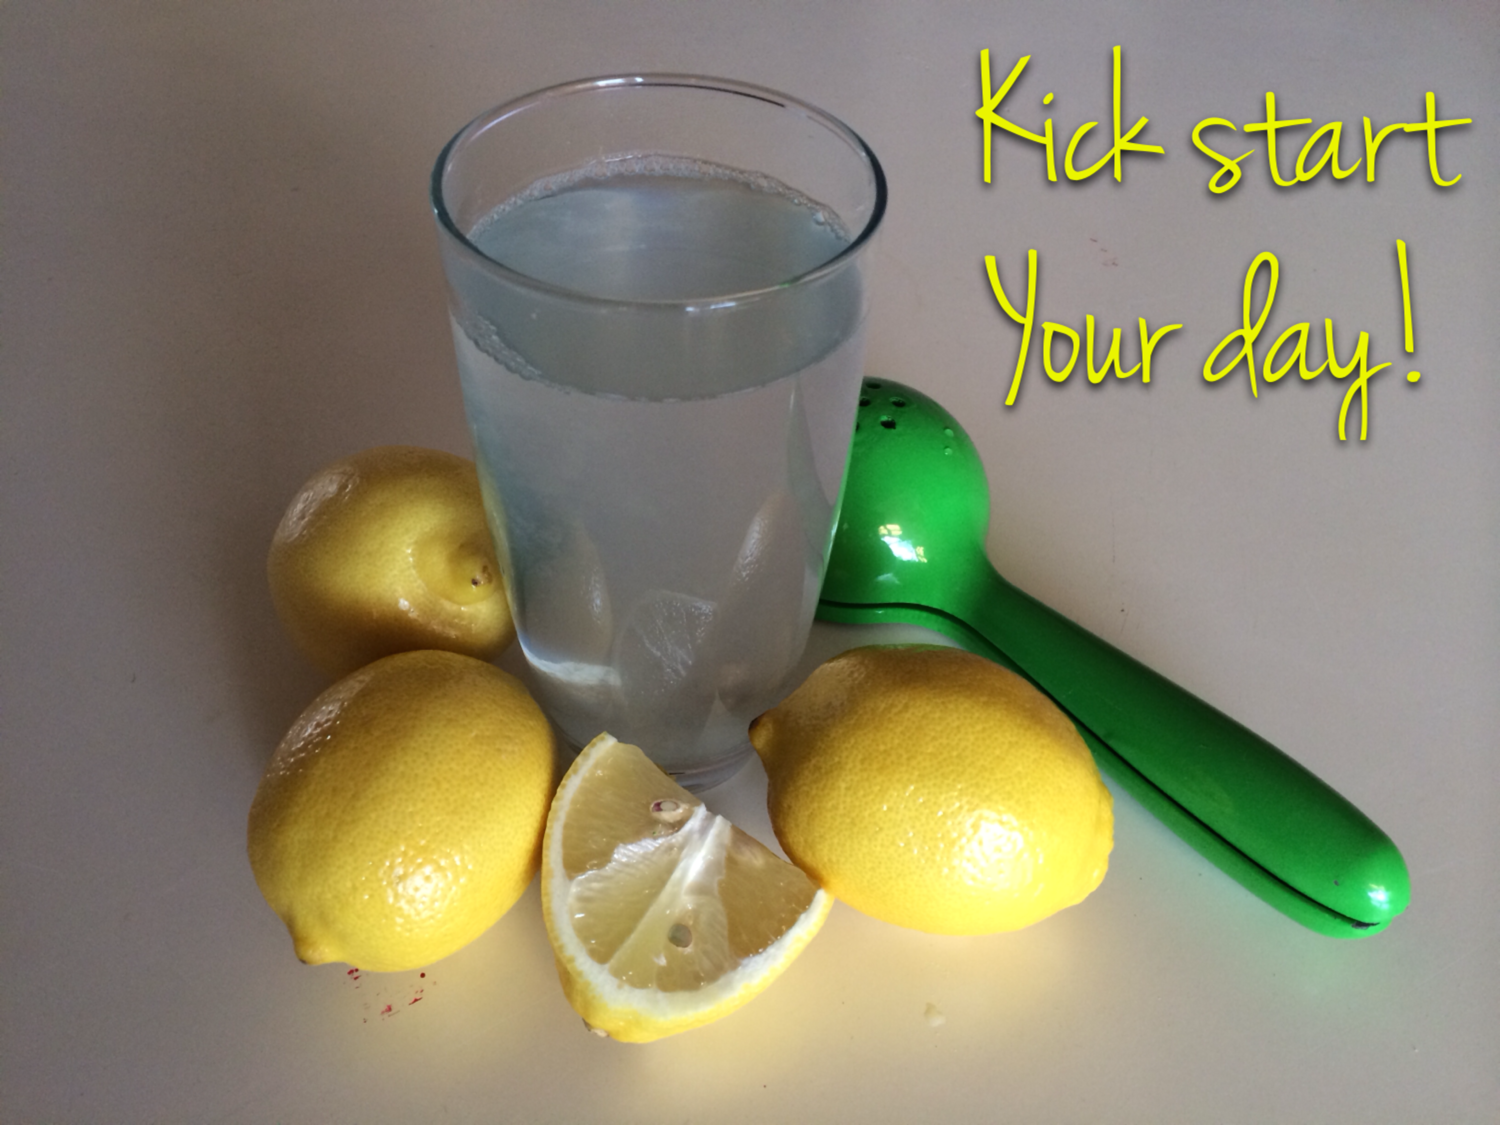 Kick start your day with lemon water!